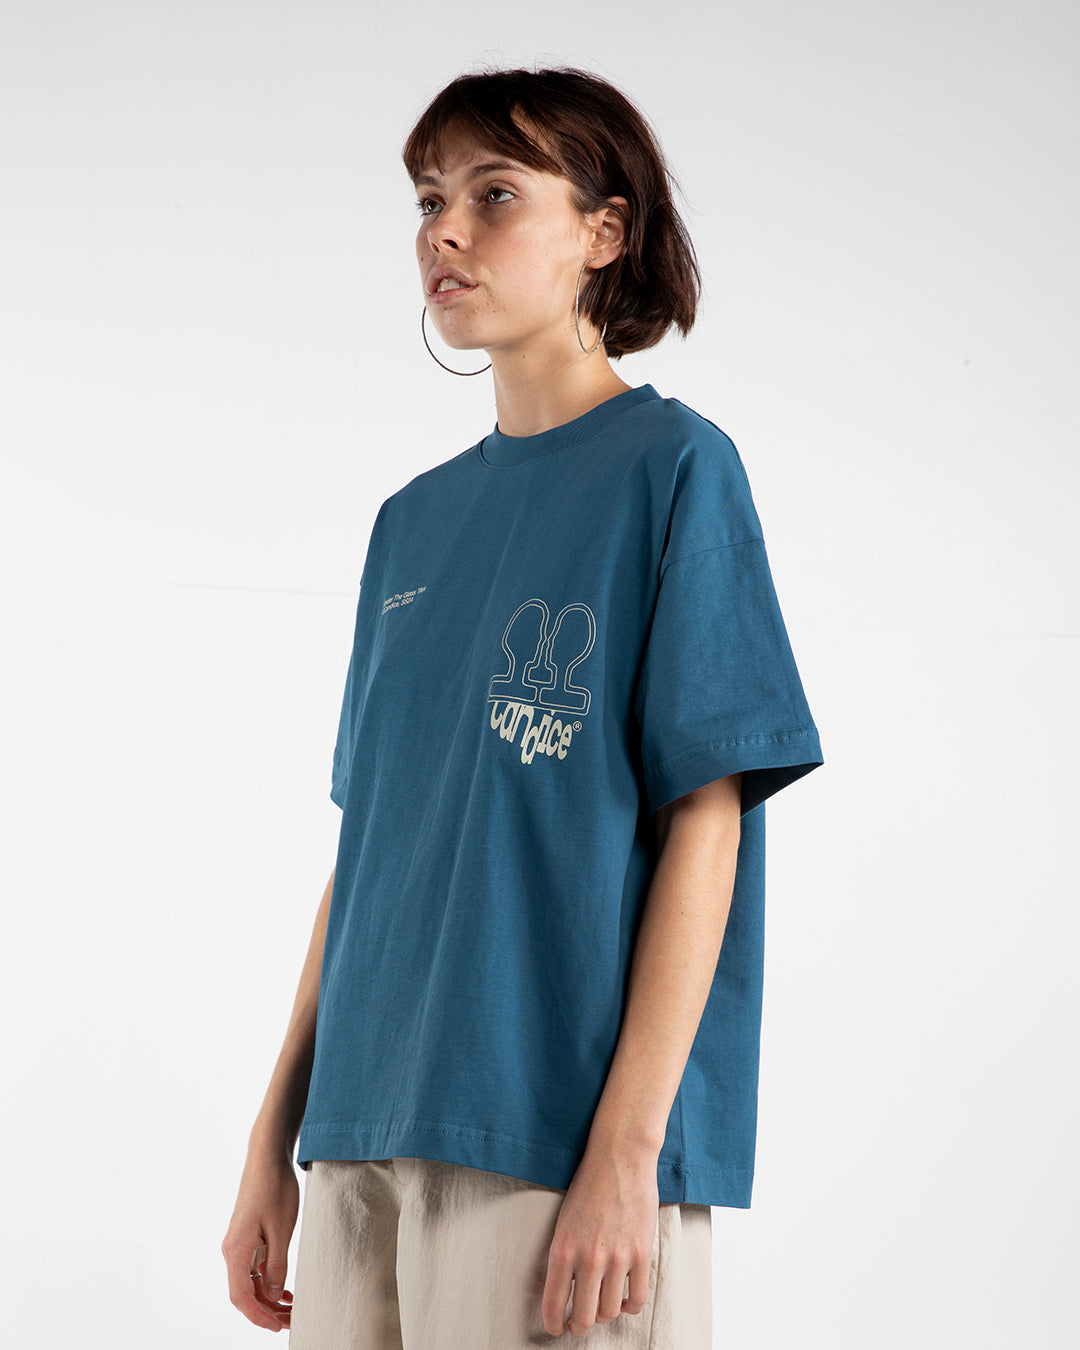 candice-boxy-tshirt-connect-blue-side